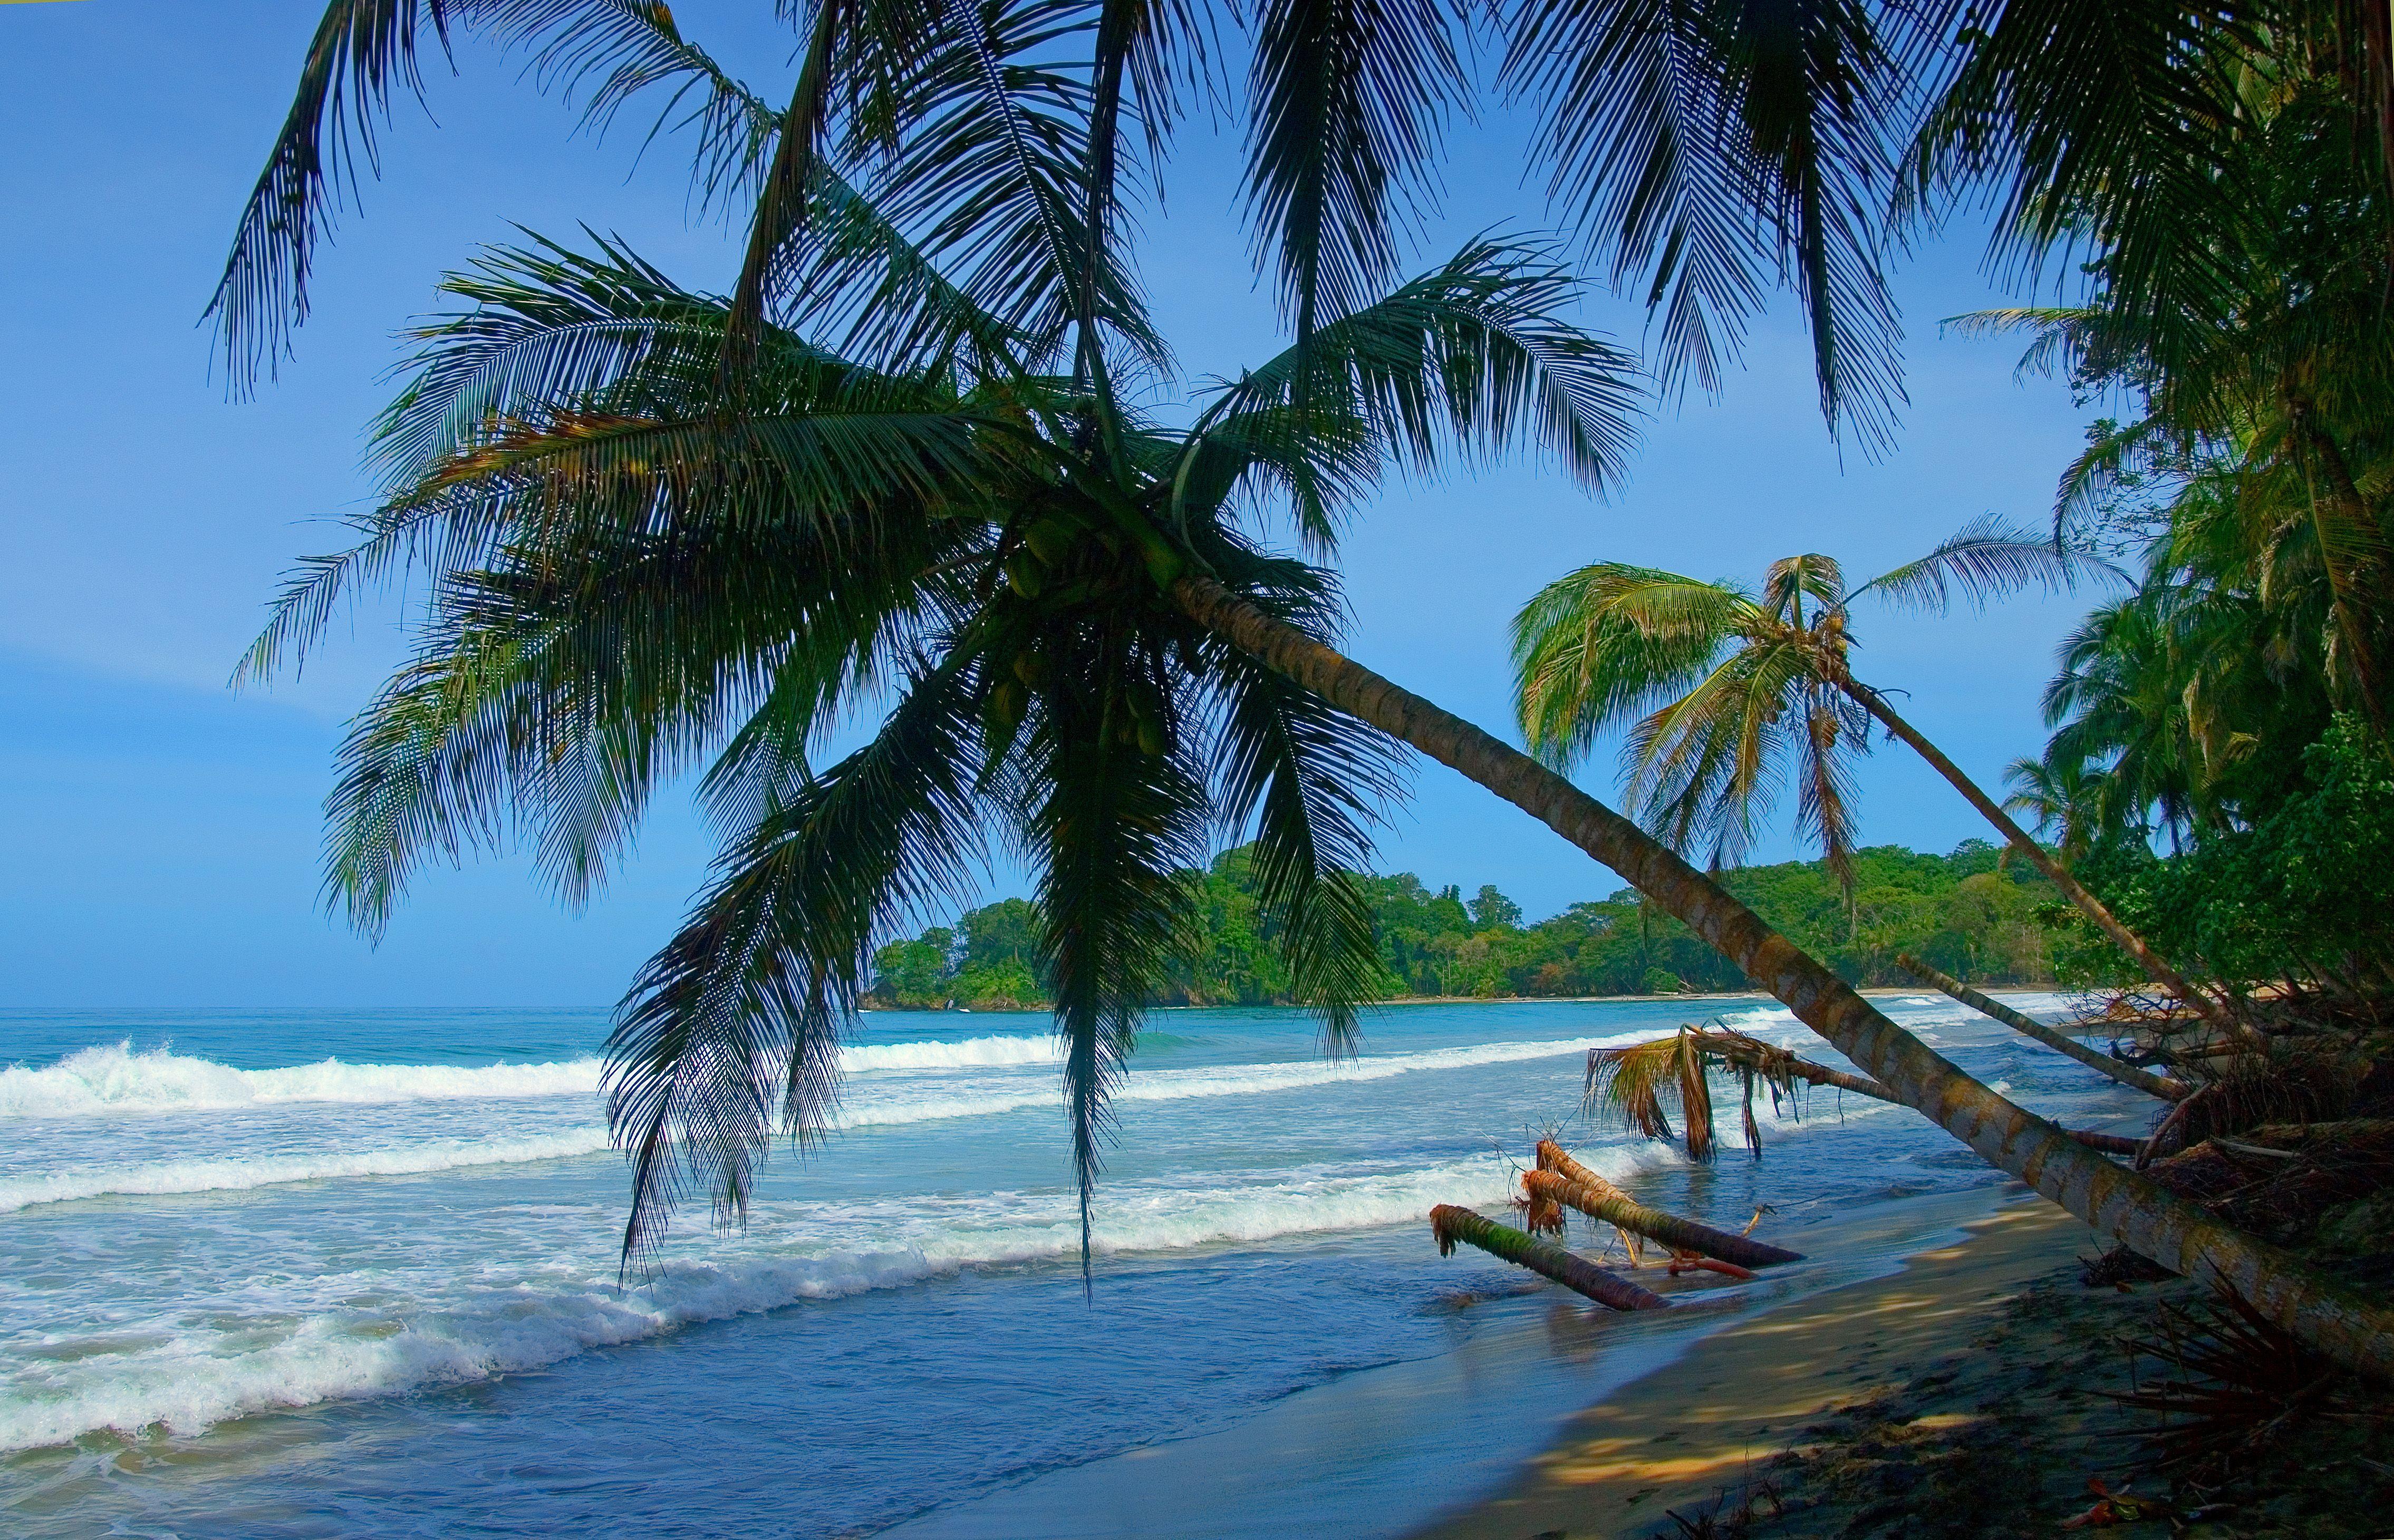 Costa Rica, possible next vacation, maybe?